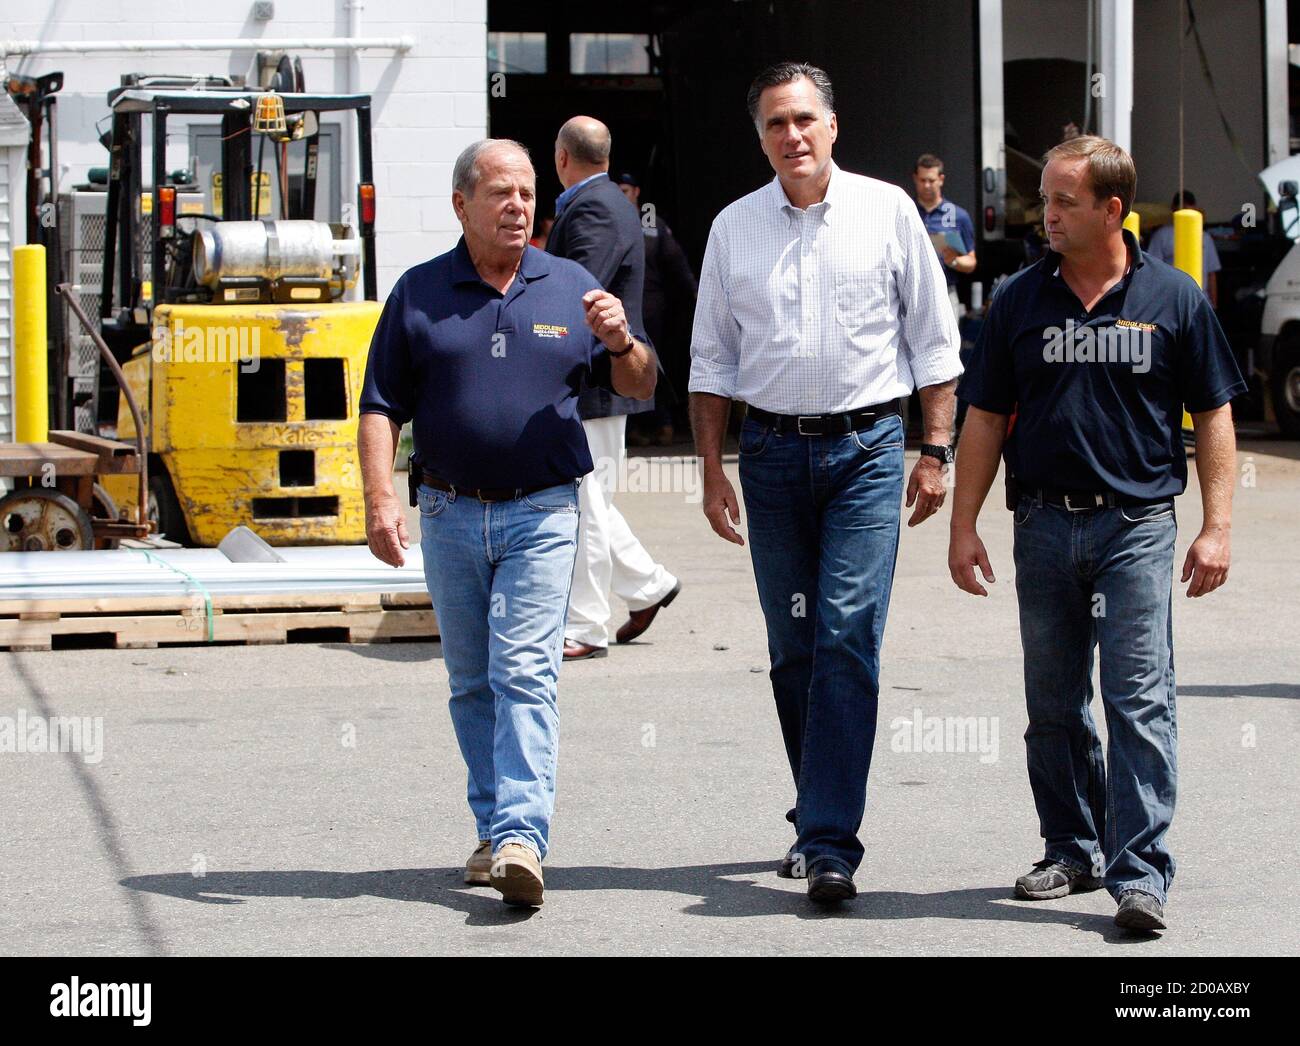 L-R) Middlesex Truck and Coach owner Brian Maloney speaks to .  Republican presidential candidate and former Massachusetts Governor Mitt  Romney as he and his son, Brian Maloney Jr., give him a tour